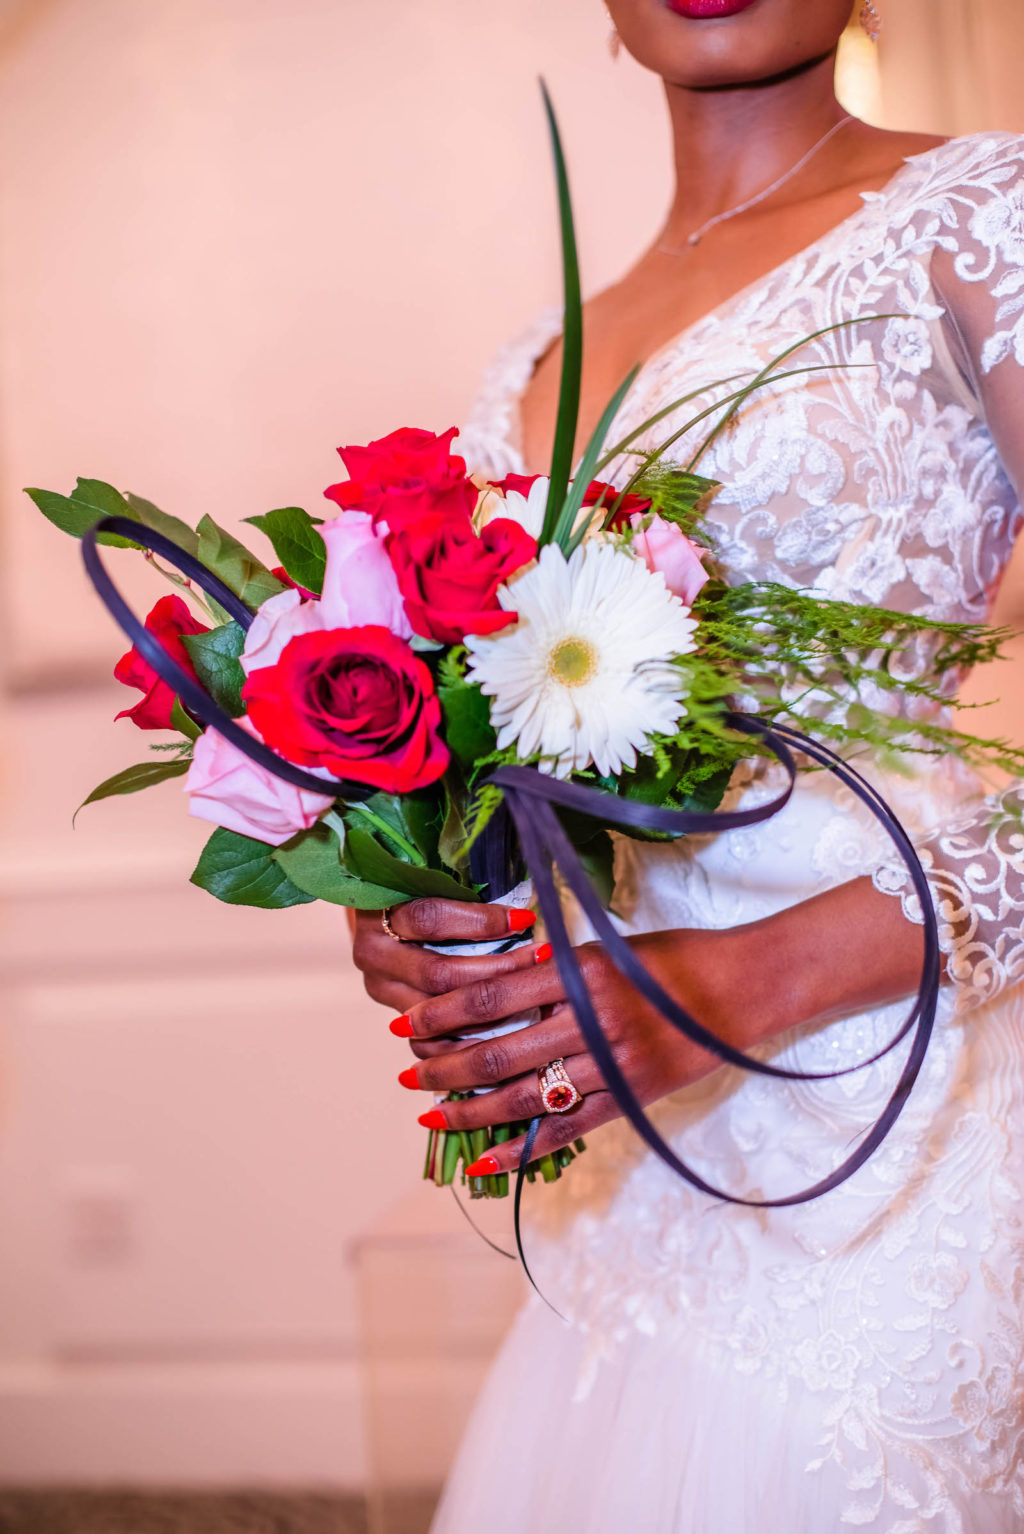 Bride Holding Simple Red, Pink, and White Bridal Bouquet with Lace Long Sleeve Wedding Gown Portrait